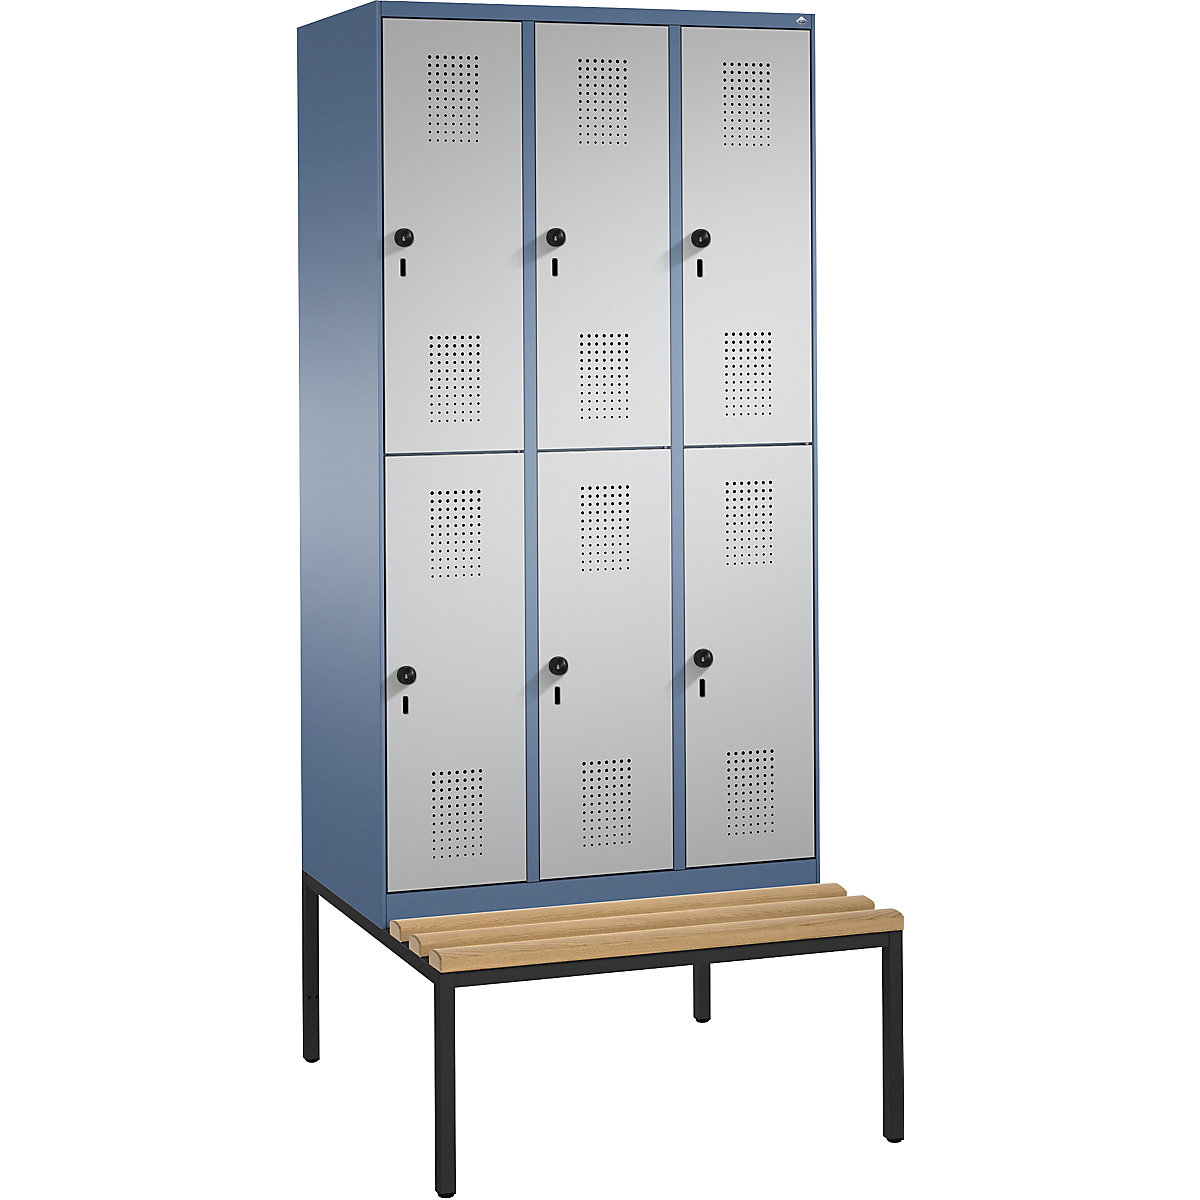 EVOLO cloakroom locker, double tier, with bench – C+P, 3 compartments, 2 shelf compartments each, compartment width 300 mm, distant blue / white aluminium-8